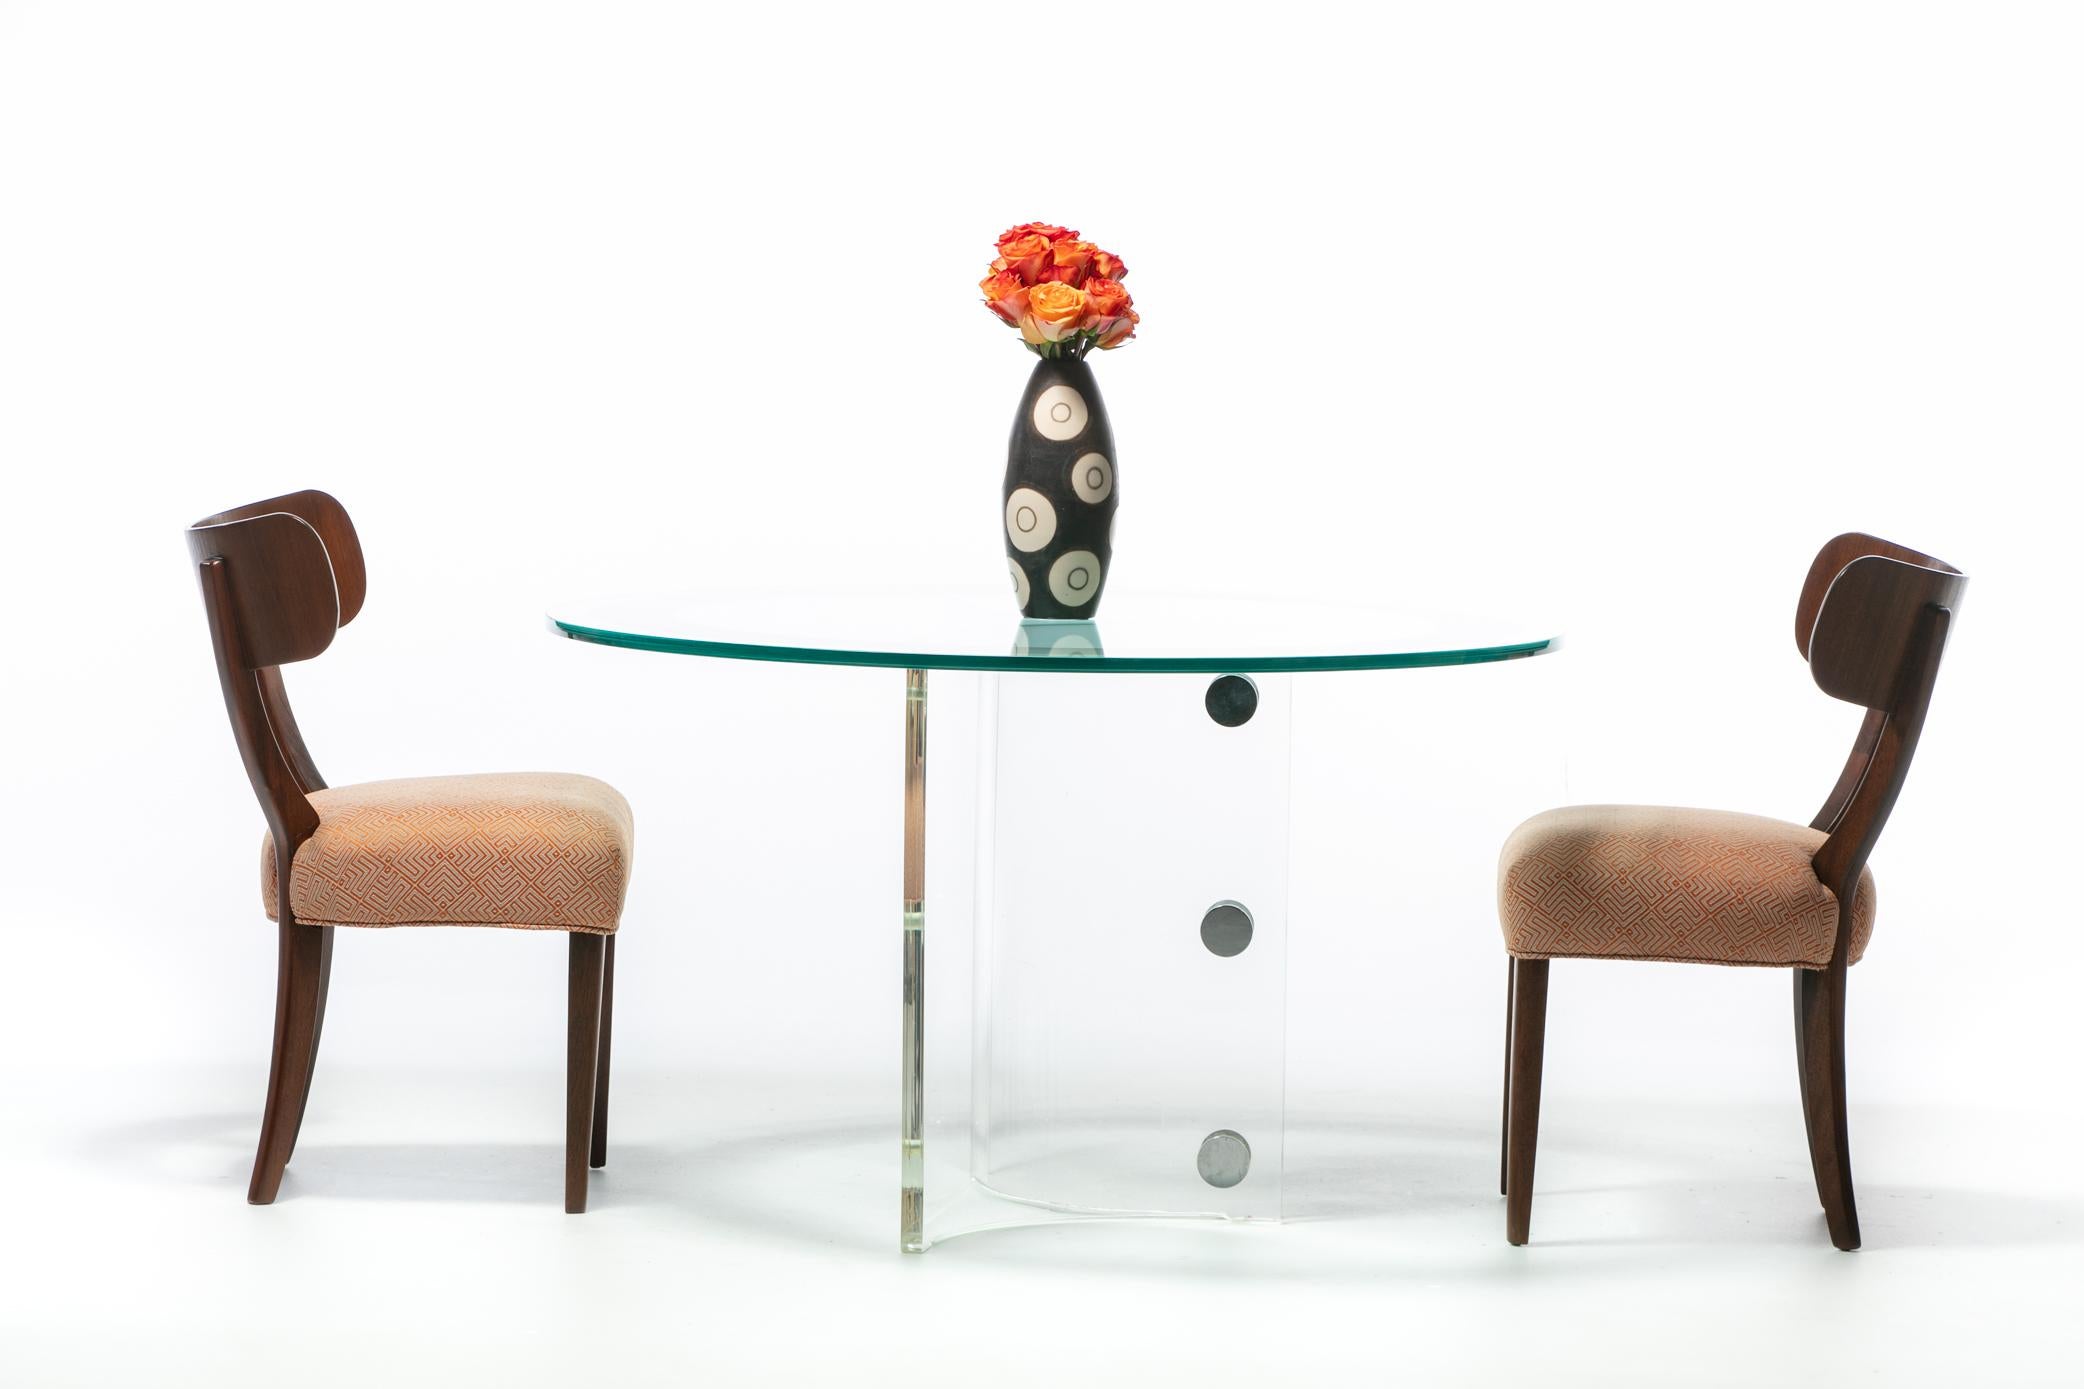 Vladimir Kagan Lucite & Glass Dining or Center Table, c. 1970s For Sale 10